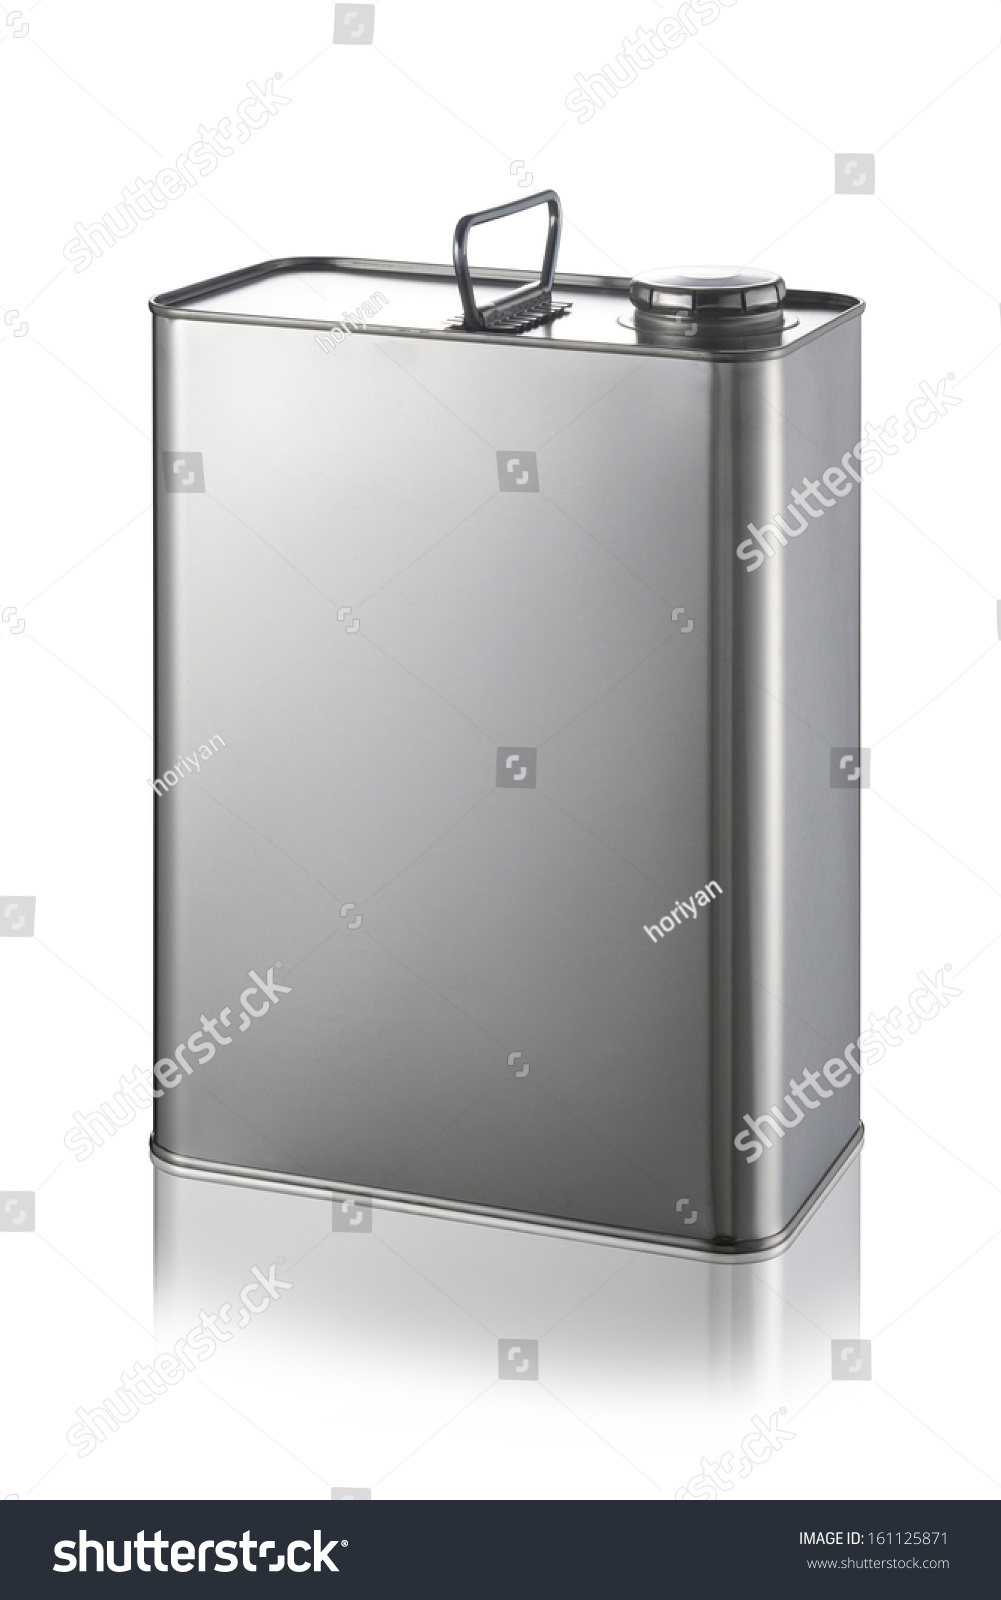 Oil Can Isolated On White Background Stock Photo 161125871 : Shutterstock